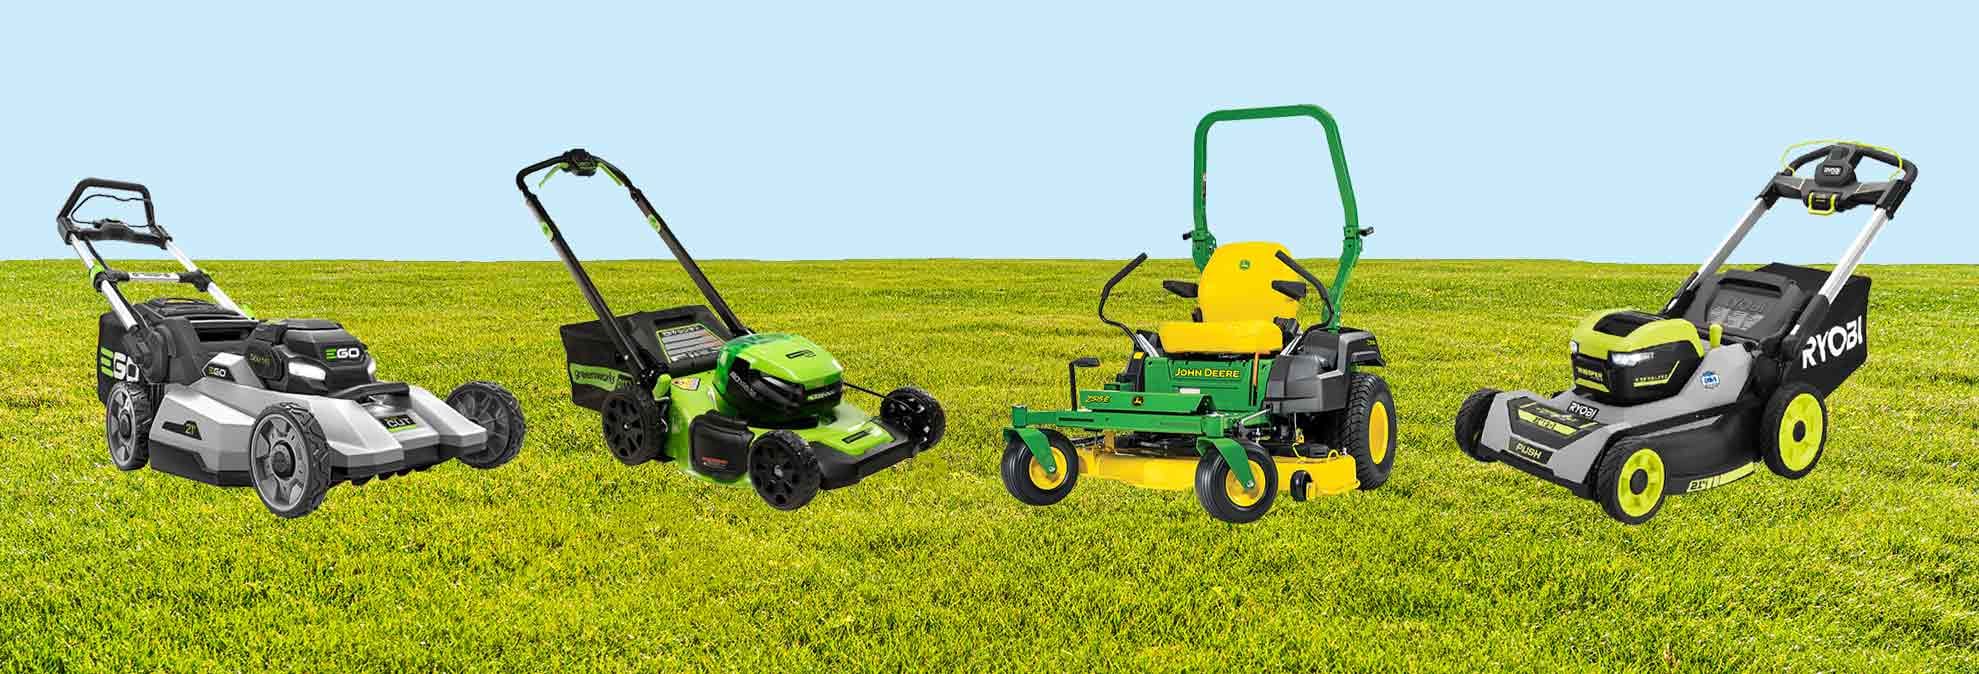 Ego, Greenworks, John Deere, and Ryobi lawn mowers on grass and sky background